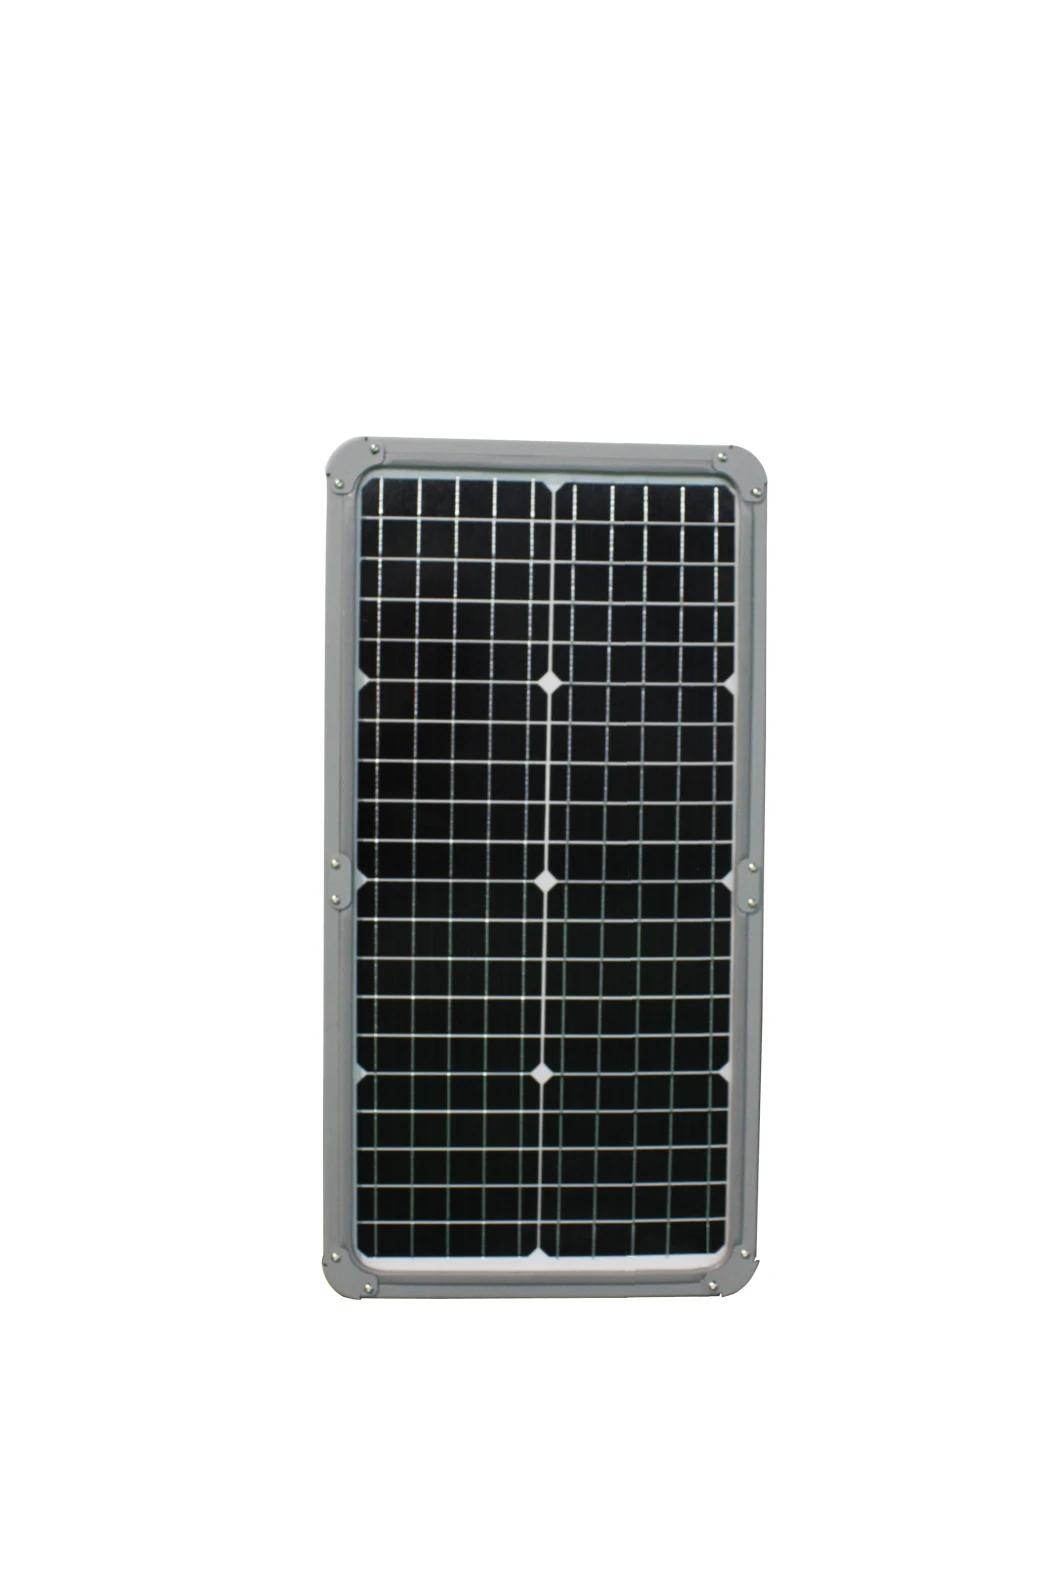 Hyper Tough Integrated Solar Street Light with Inbuilt Lithium Battery and Solar Panel